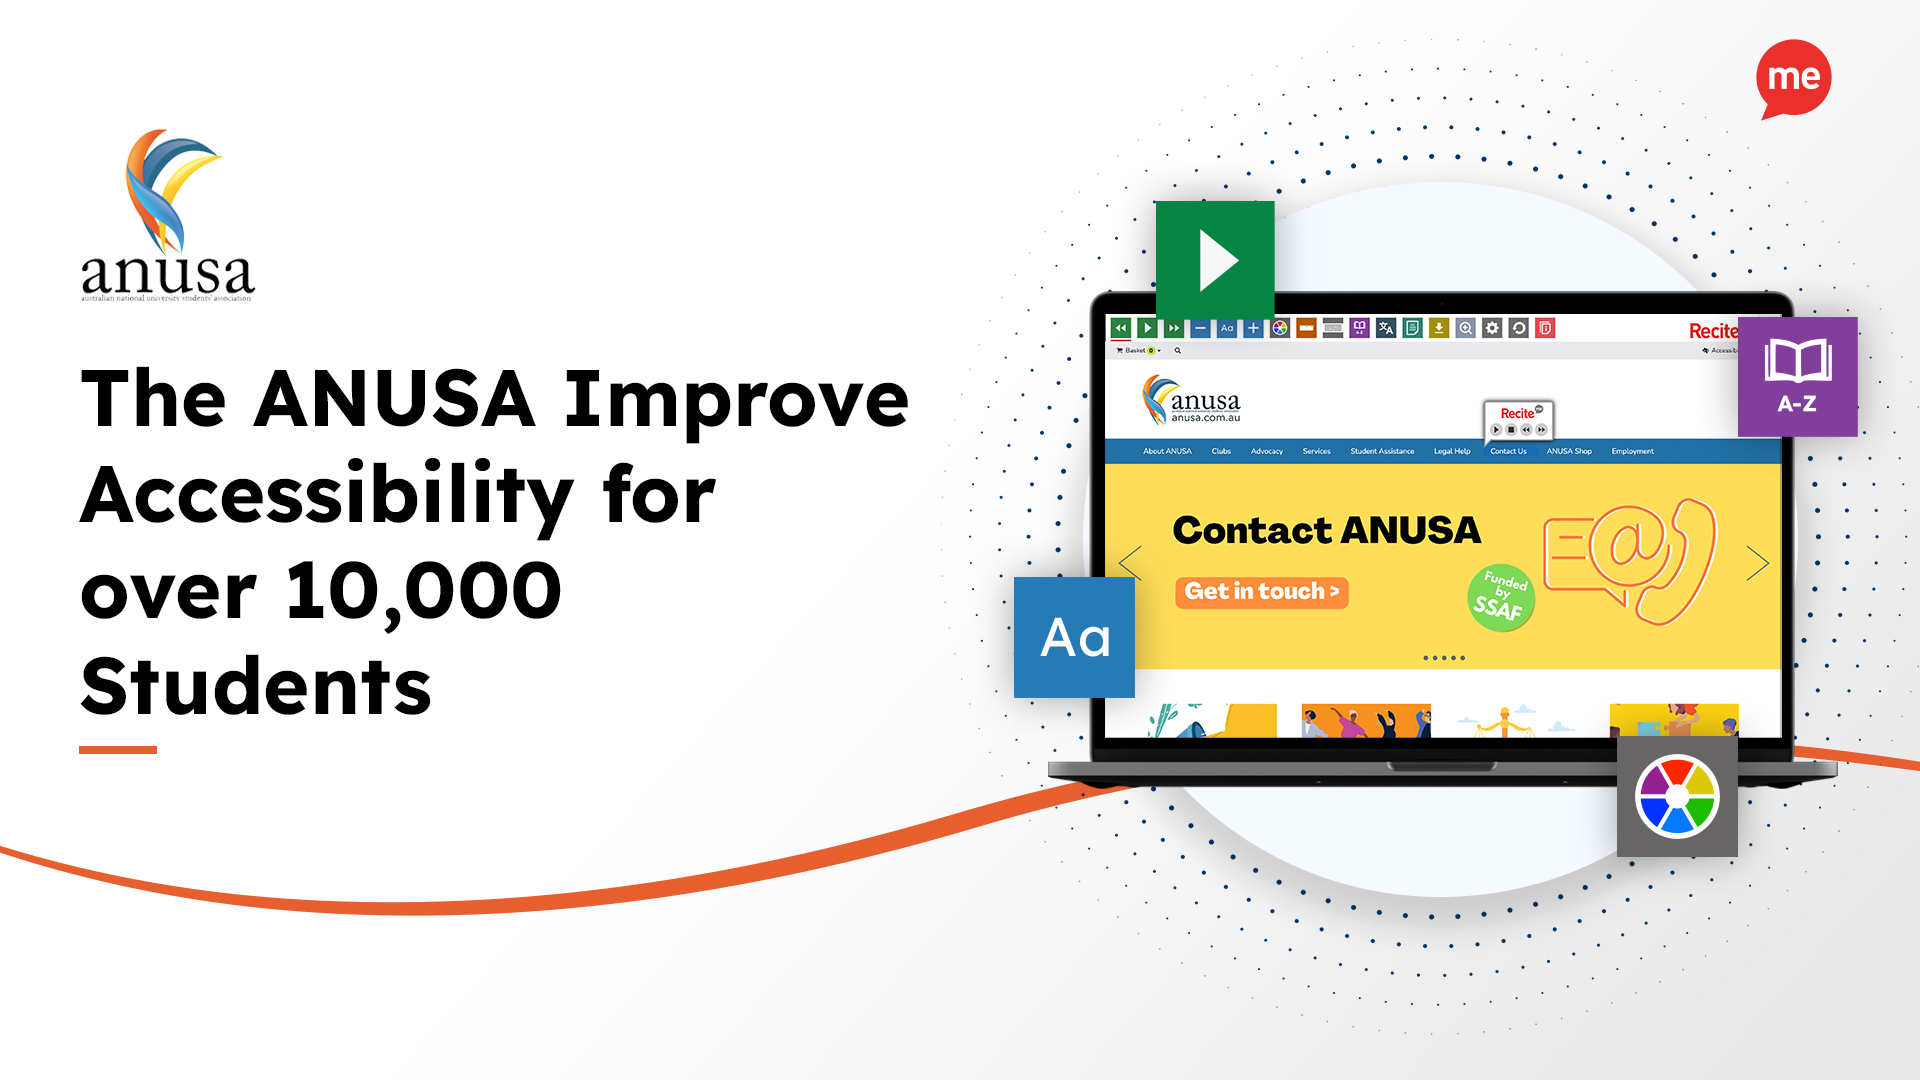 The ANUSA improve accessibility for over 10.000 students